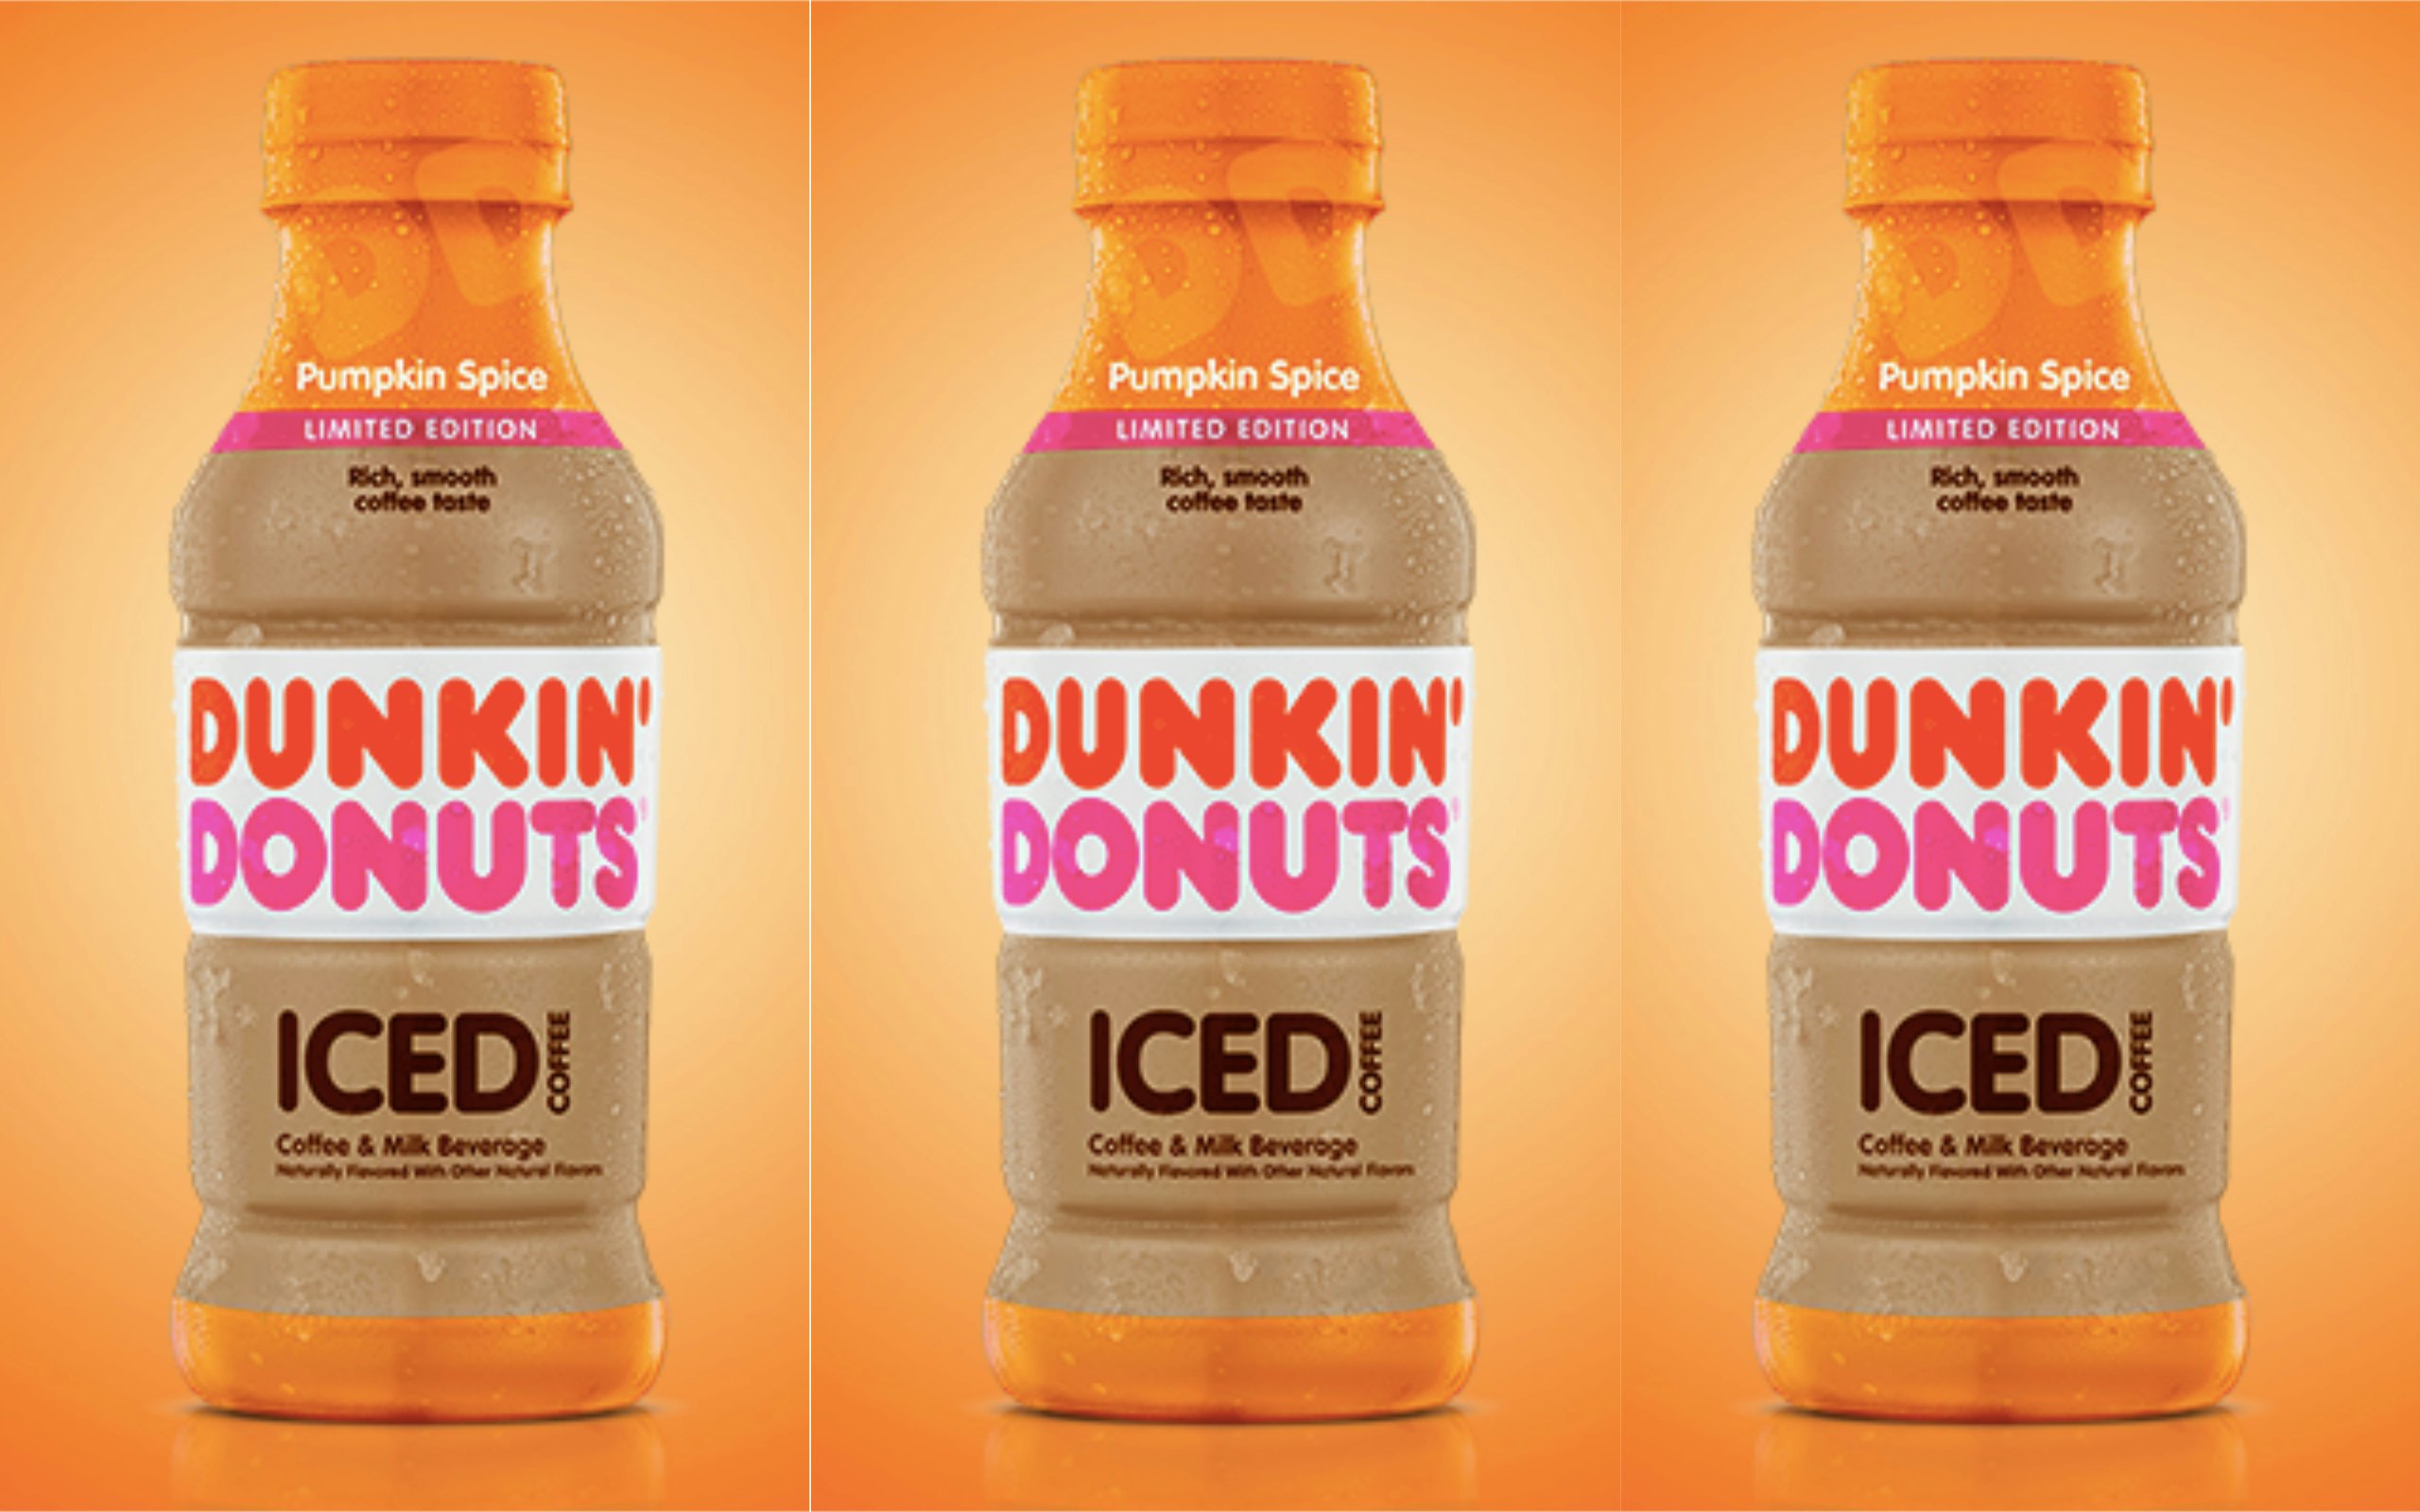 Dunkin Donuts Pumpkin Spice Bottled Iced Coffee Is Available For A Limited Time